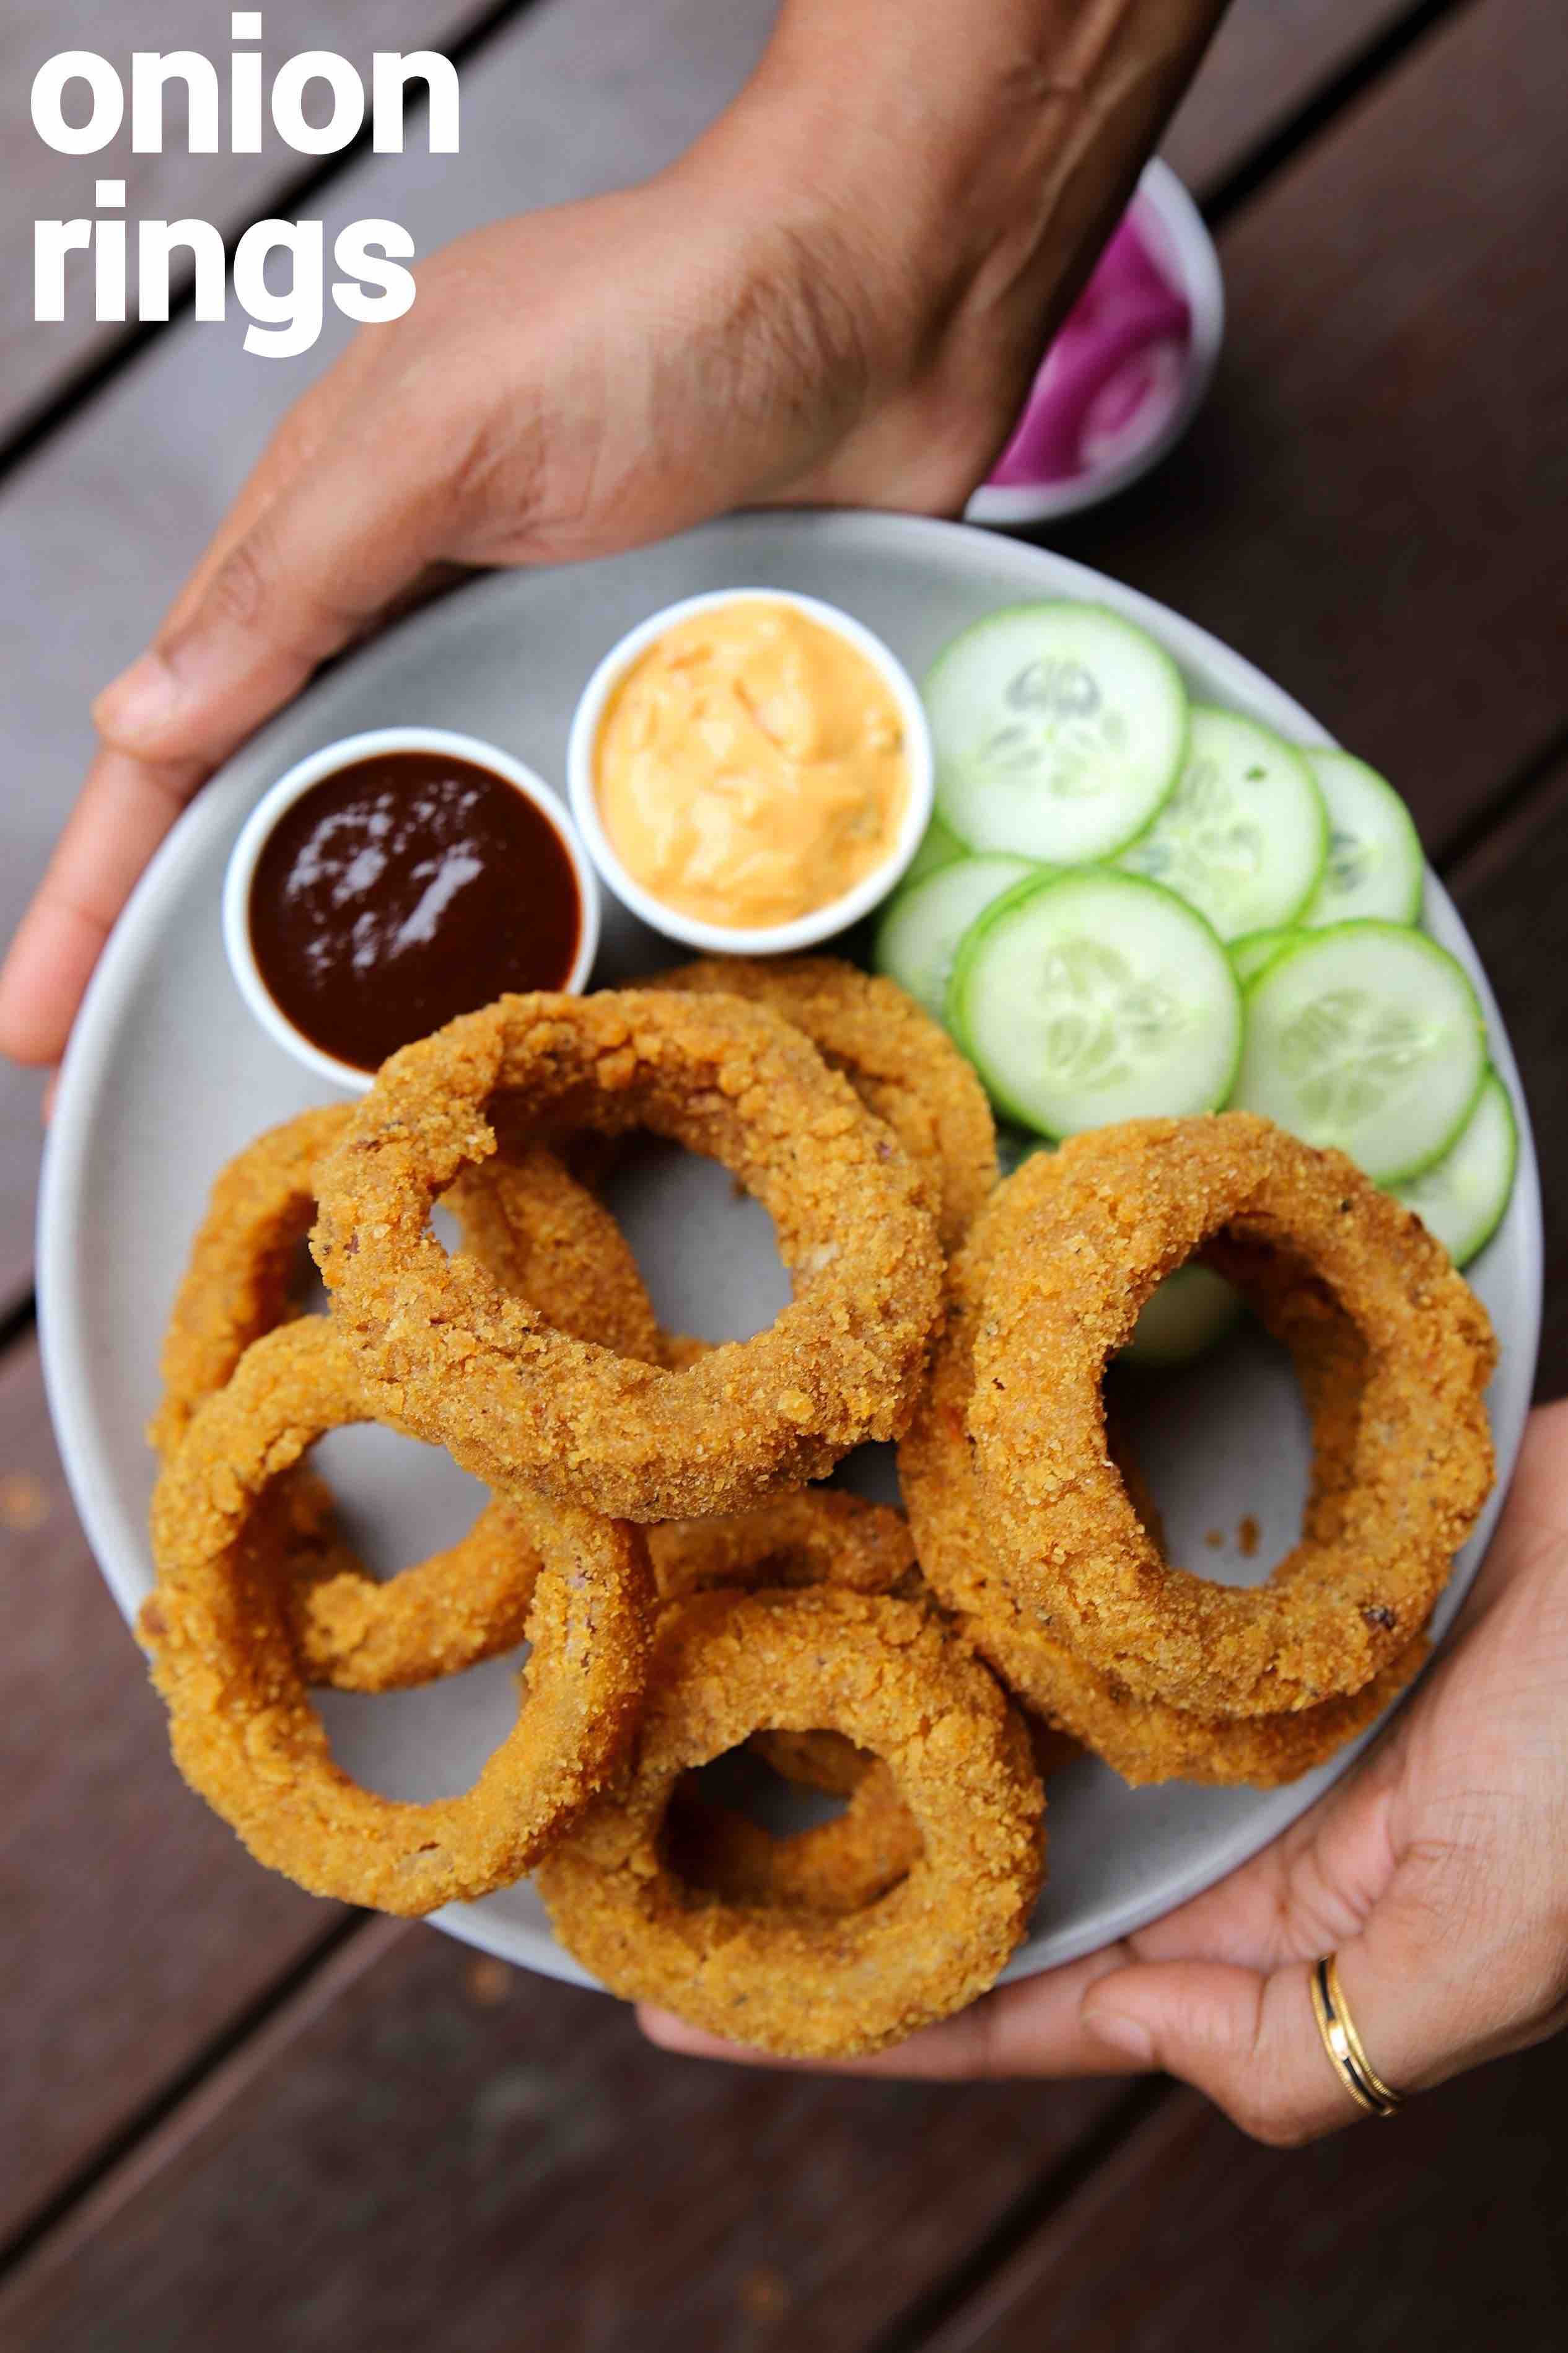 Details more than 101 fried onion rings best - netgroup.edu.vn